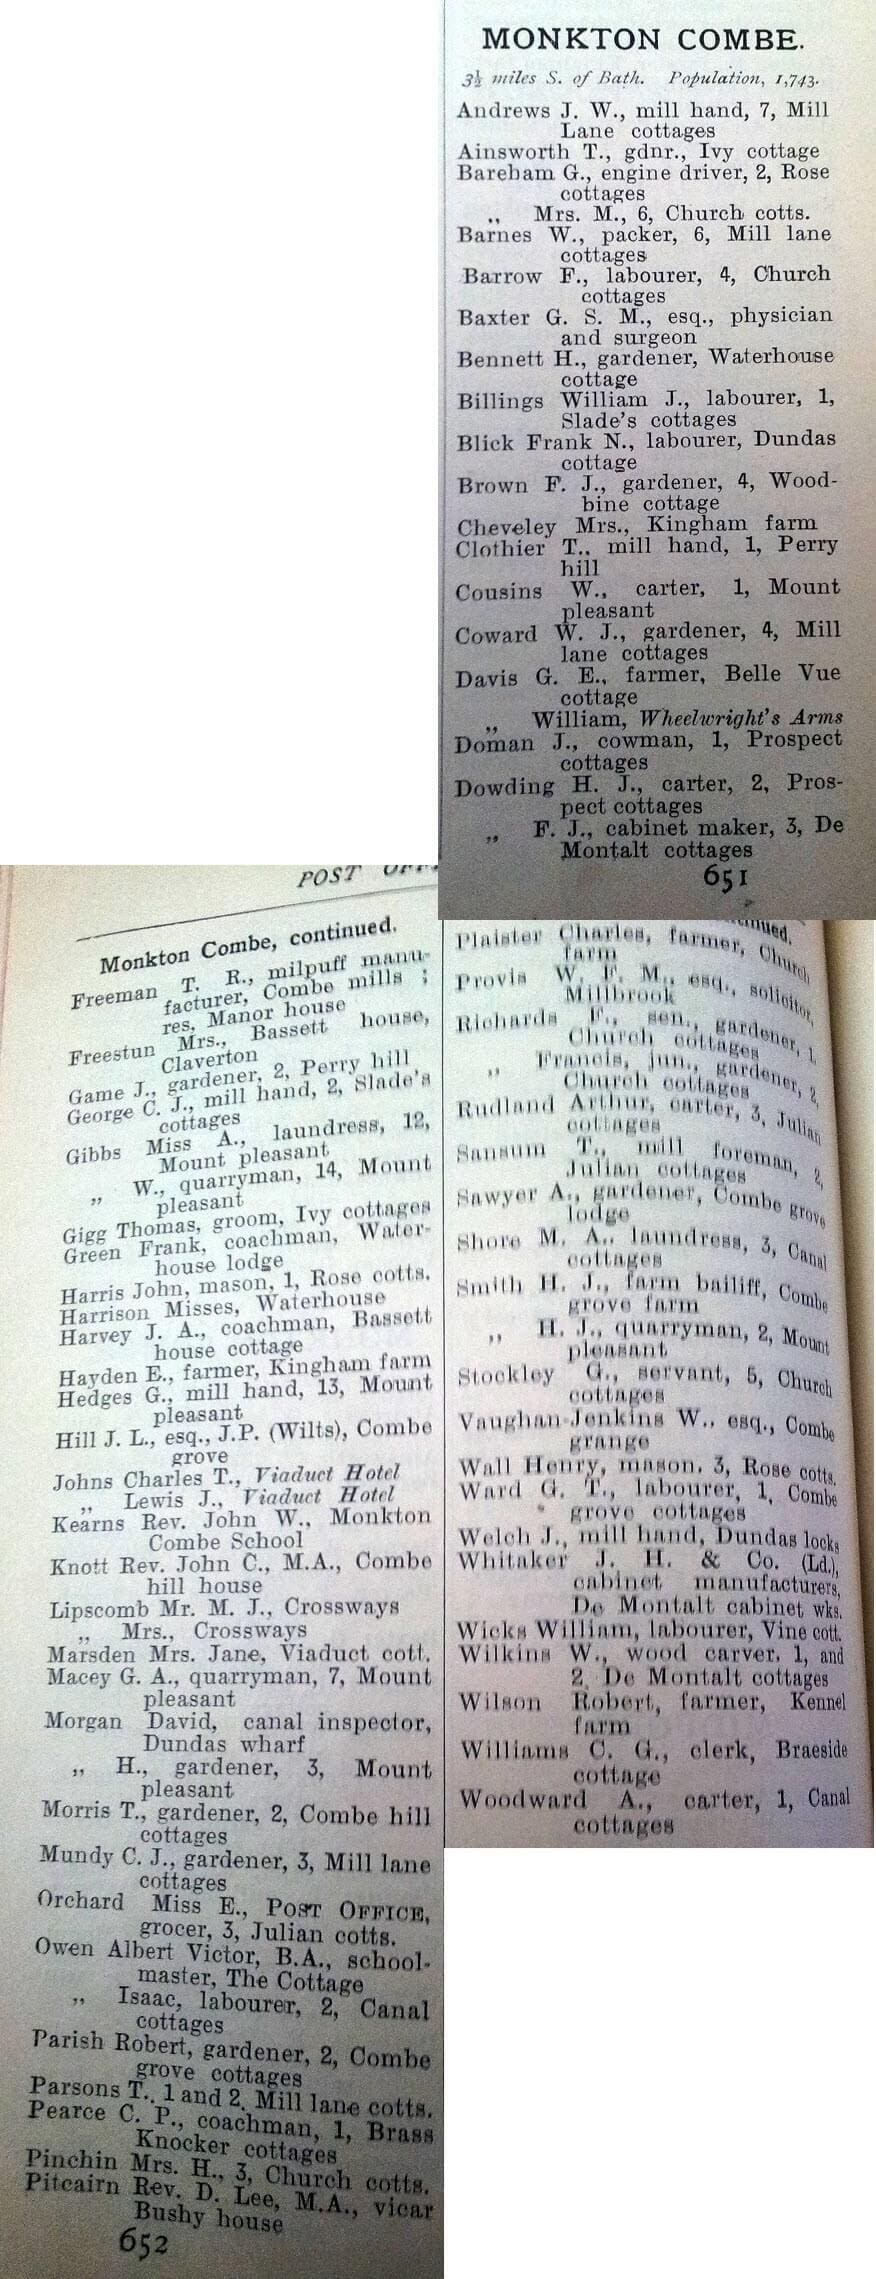 1906 Post Office Directory for Monkton Combe